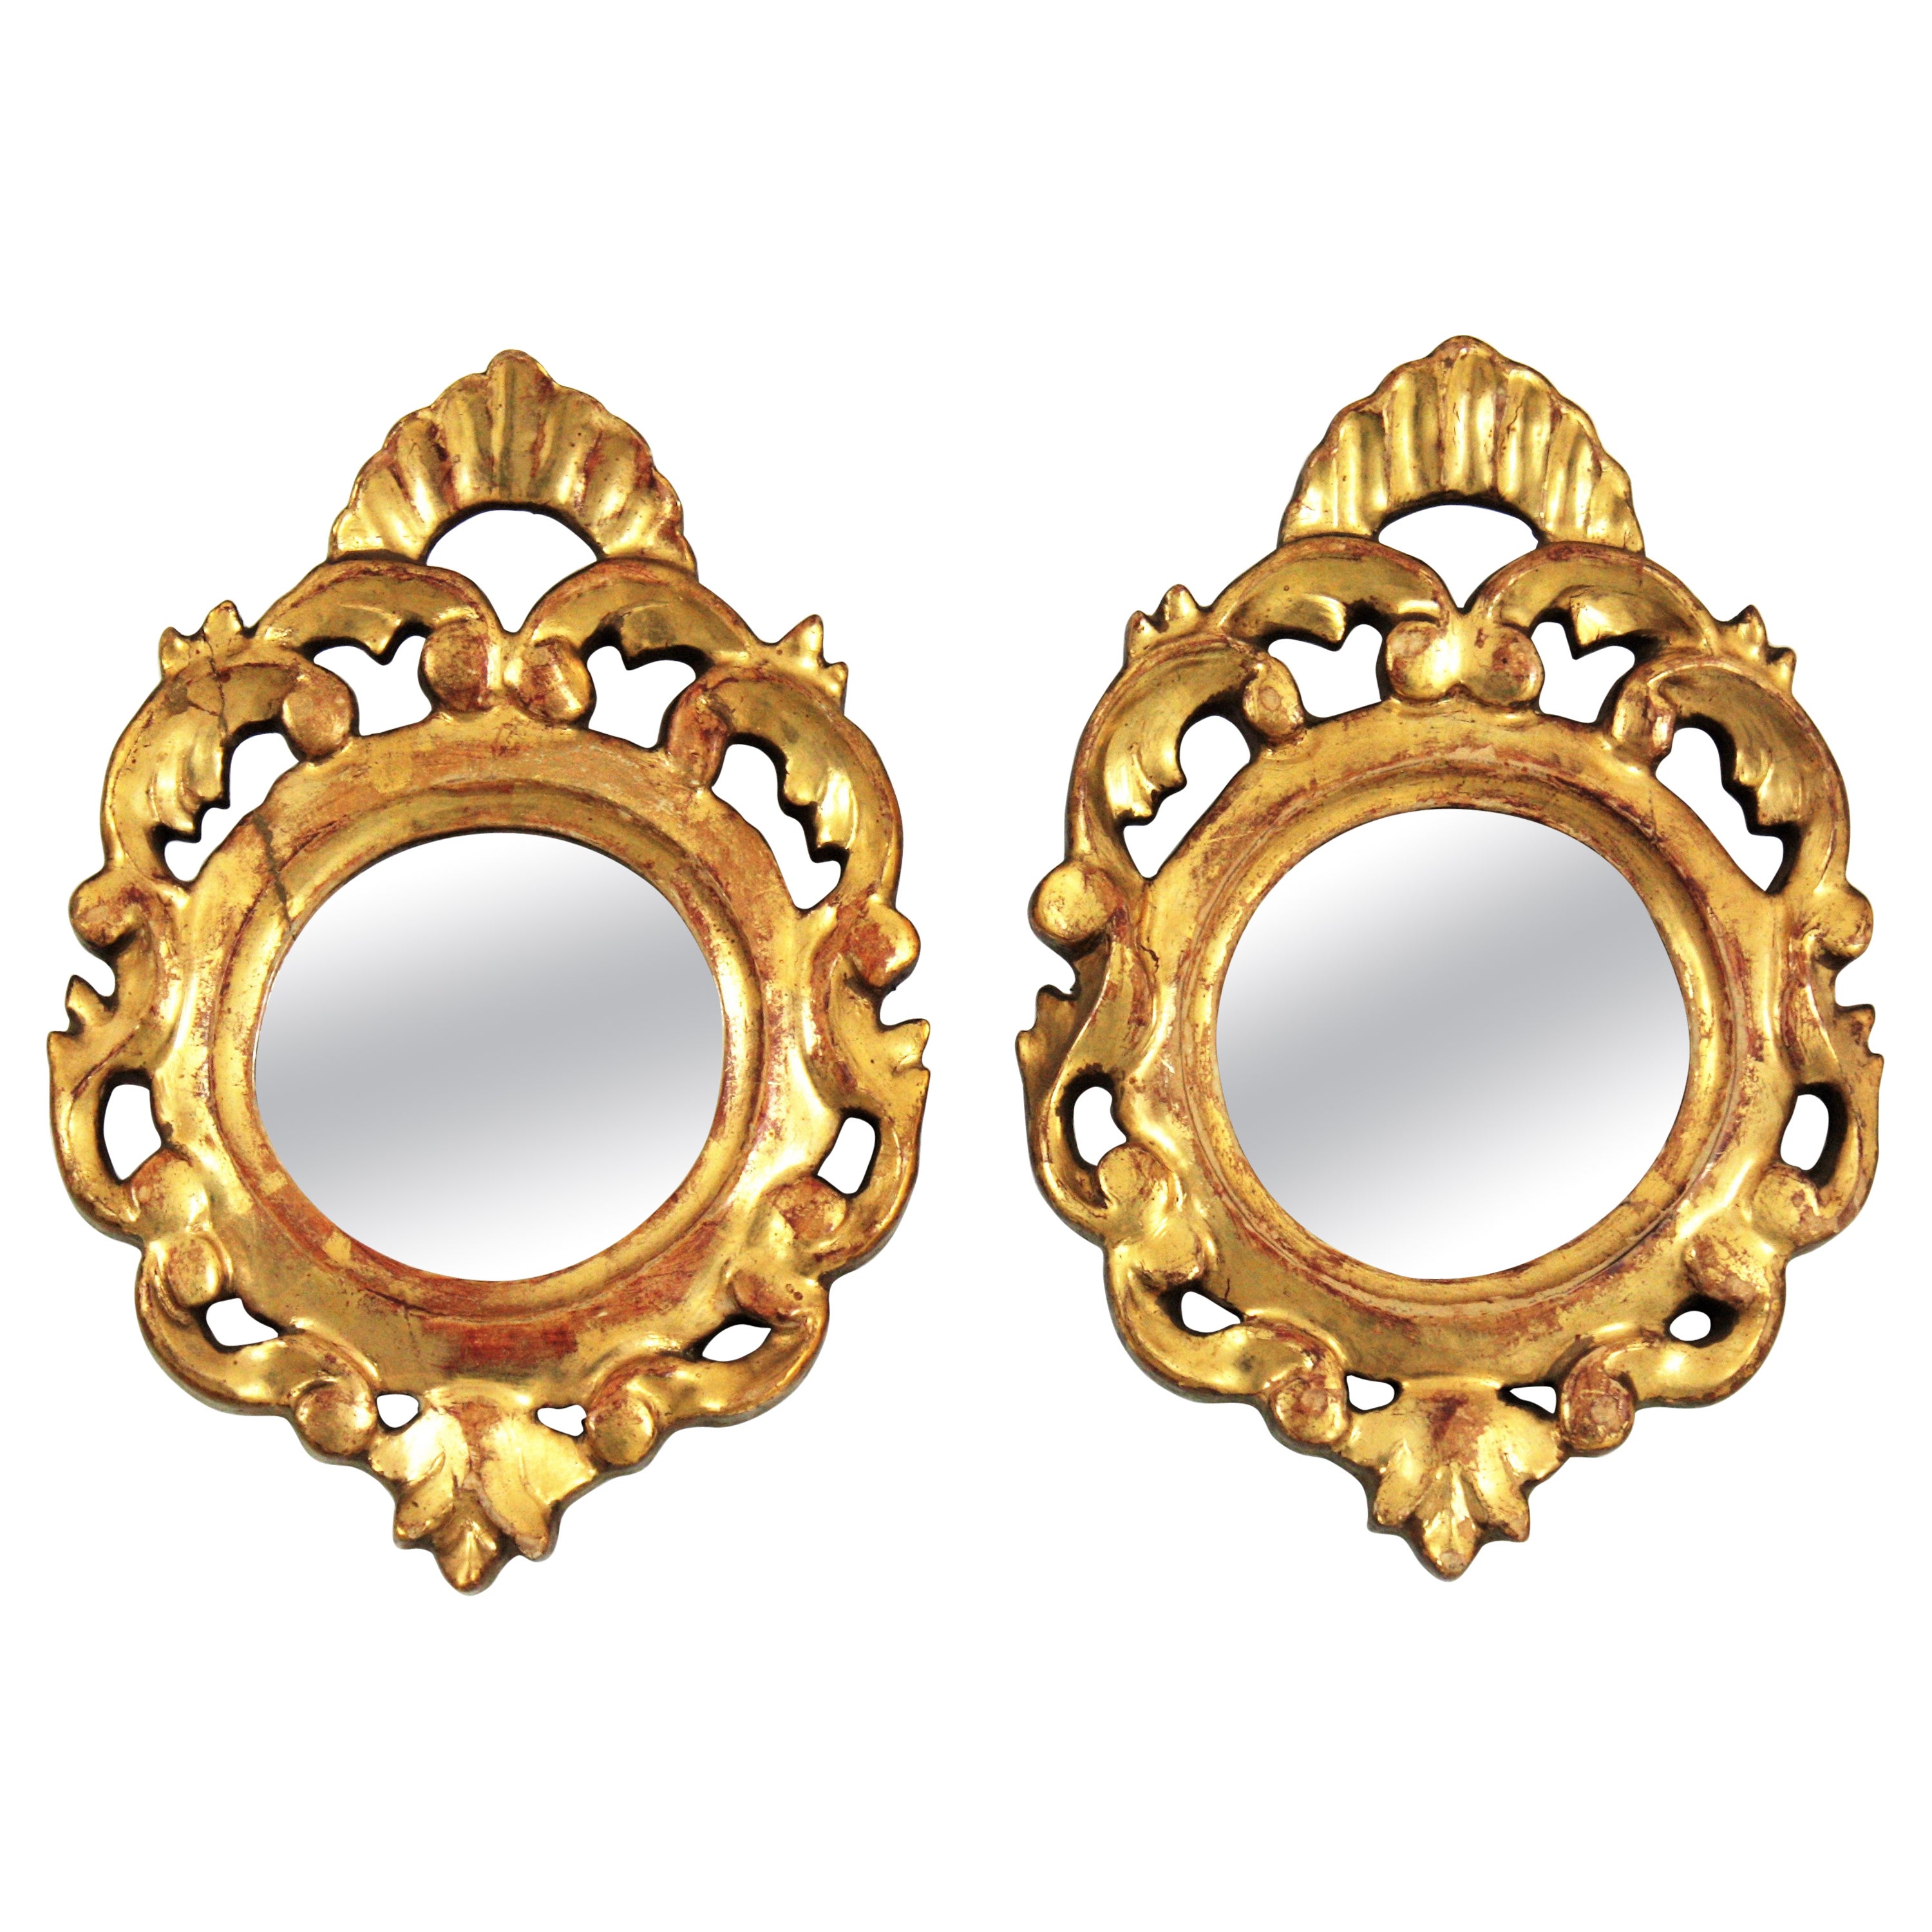 Rococo Style Carved Giltwood Miniature Wall Mirrors, Pair